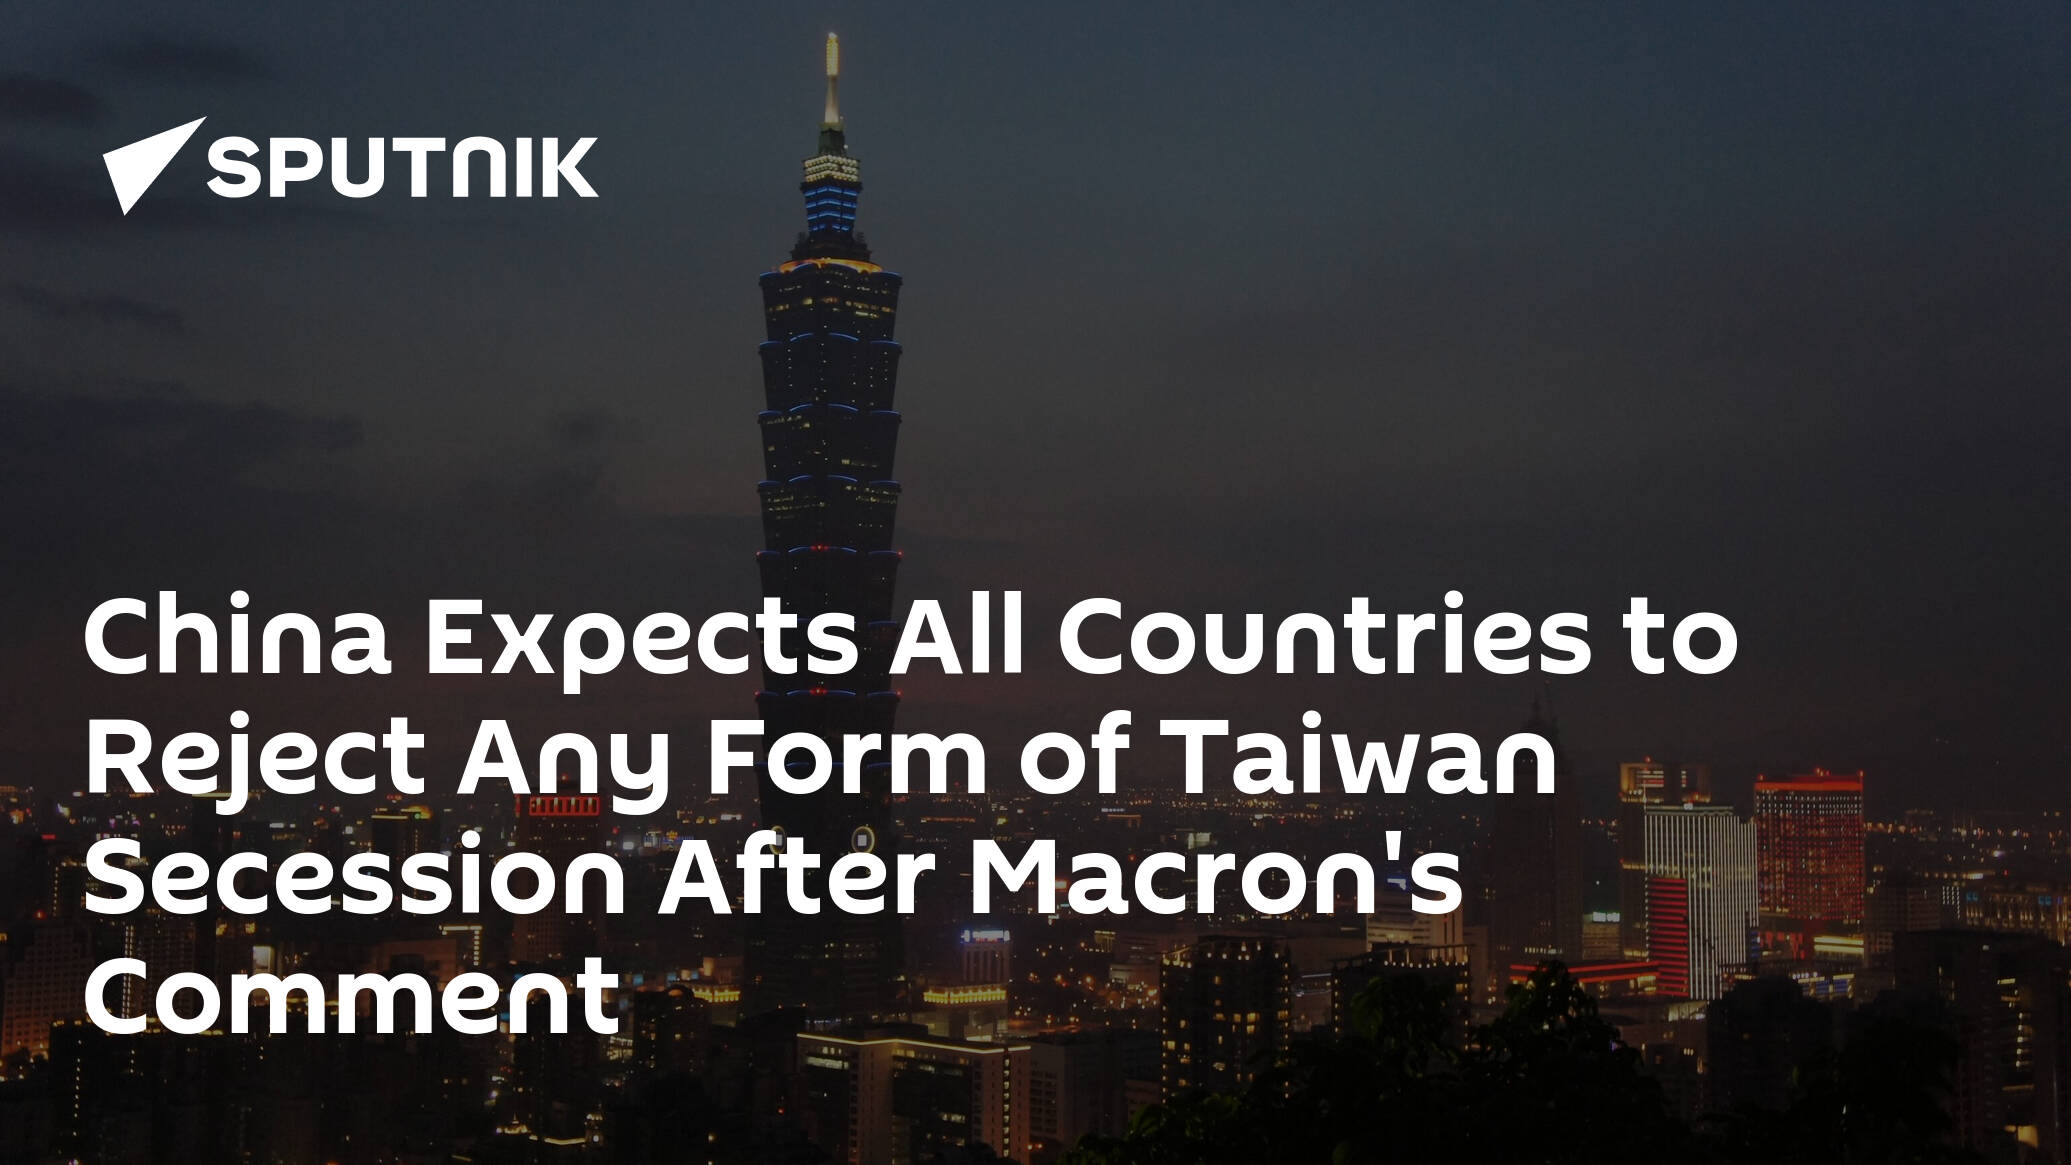 China Expects All Countries to Reject Any Form of Taiwan Secession After Macron's Comment